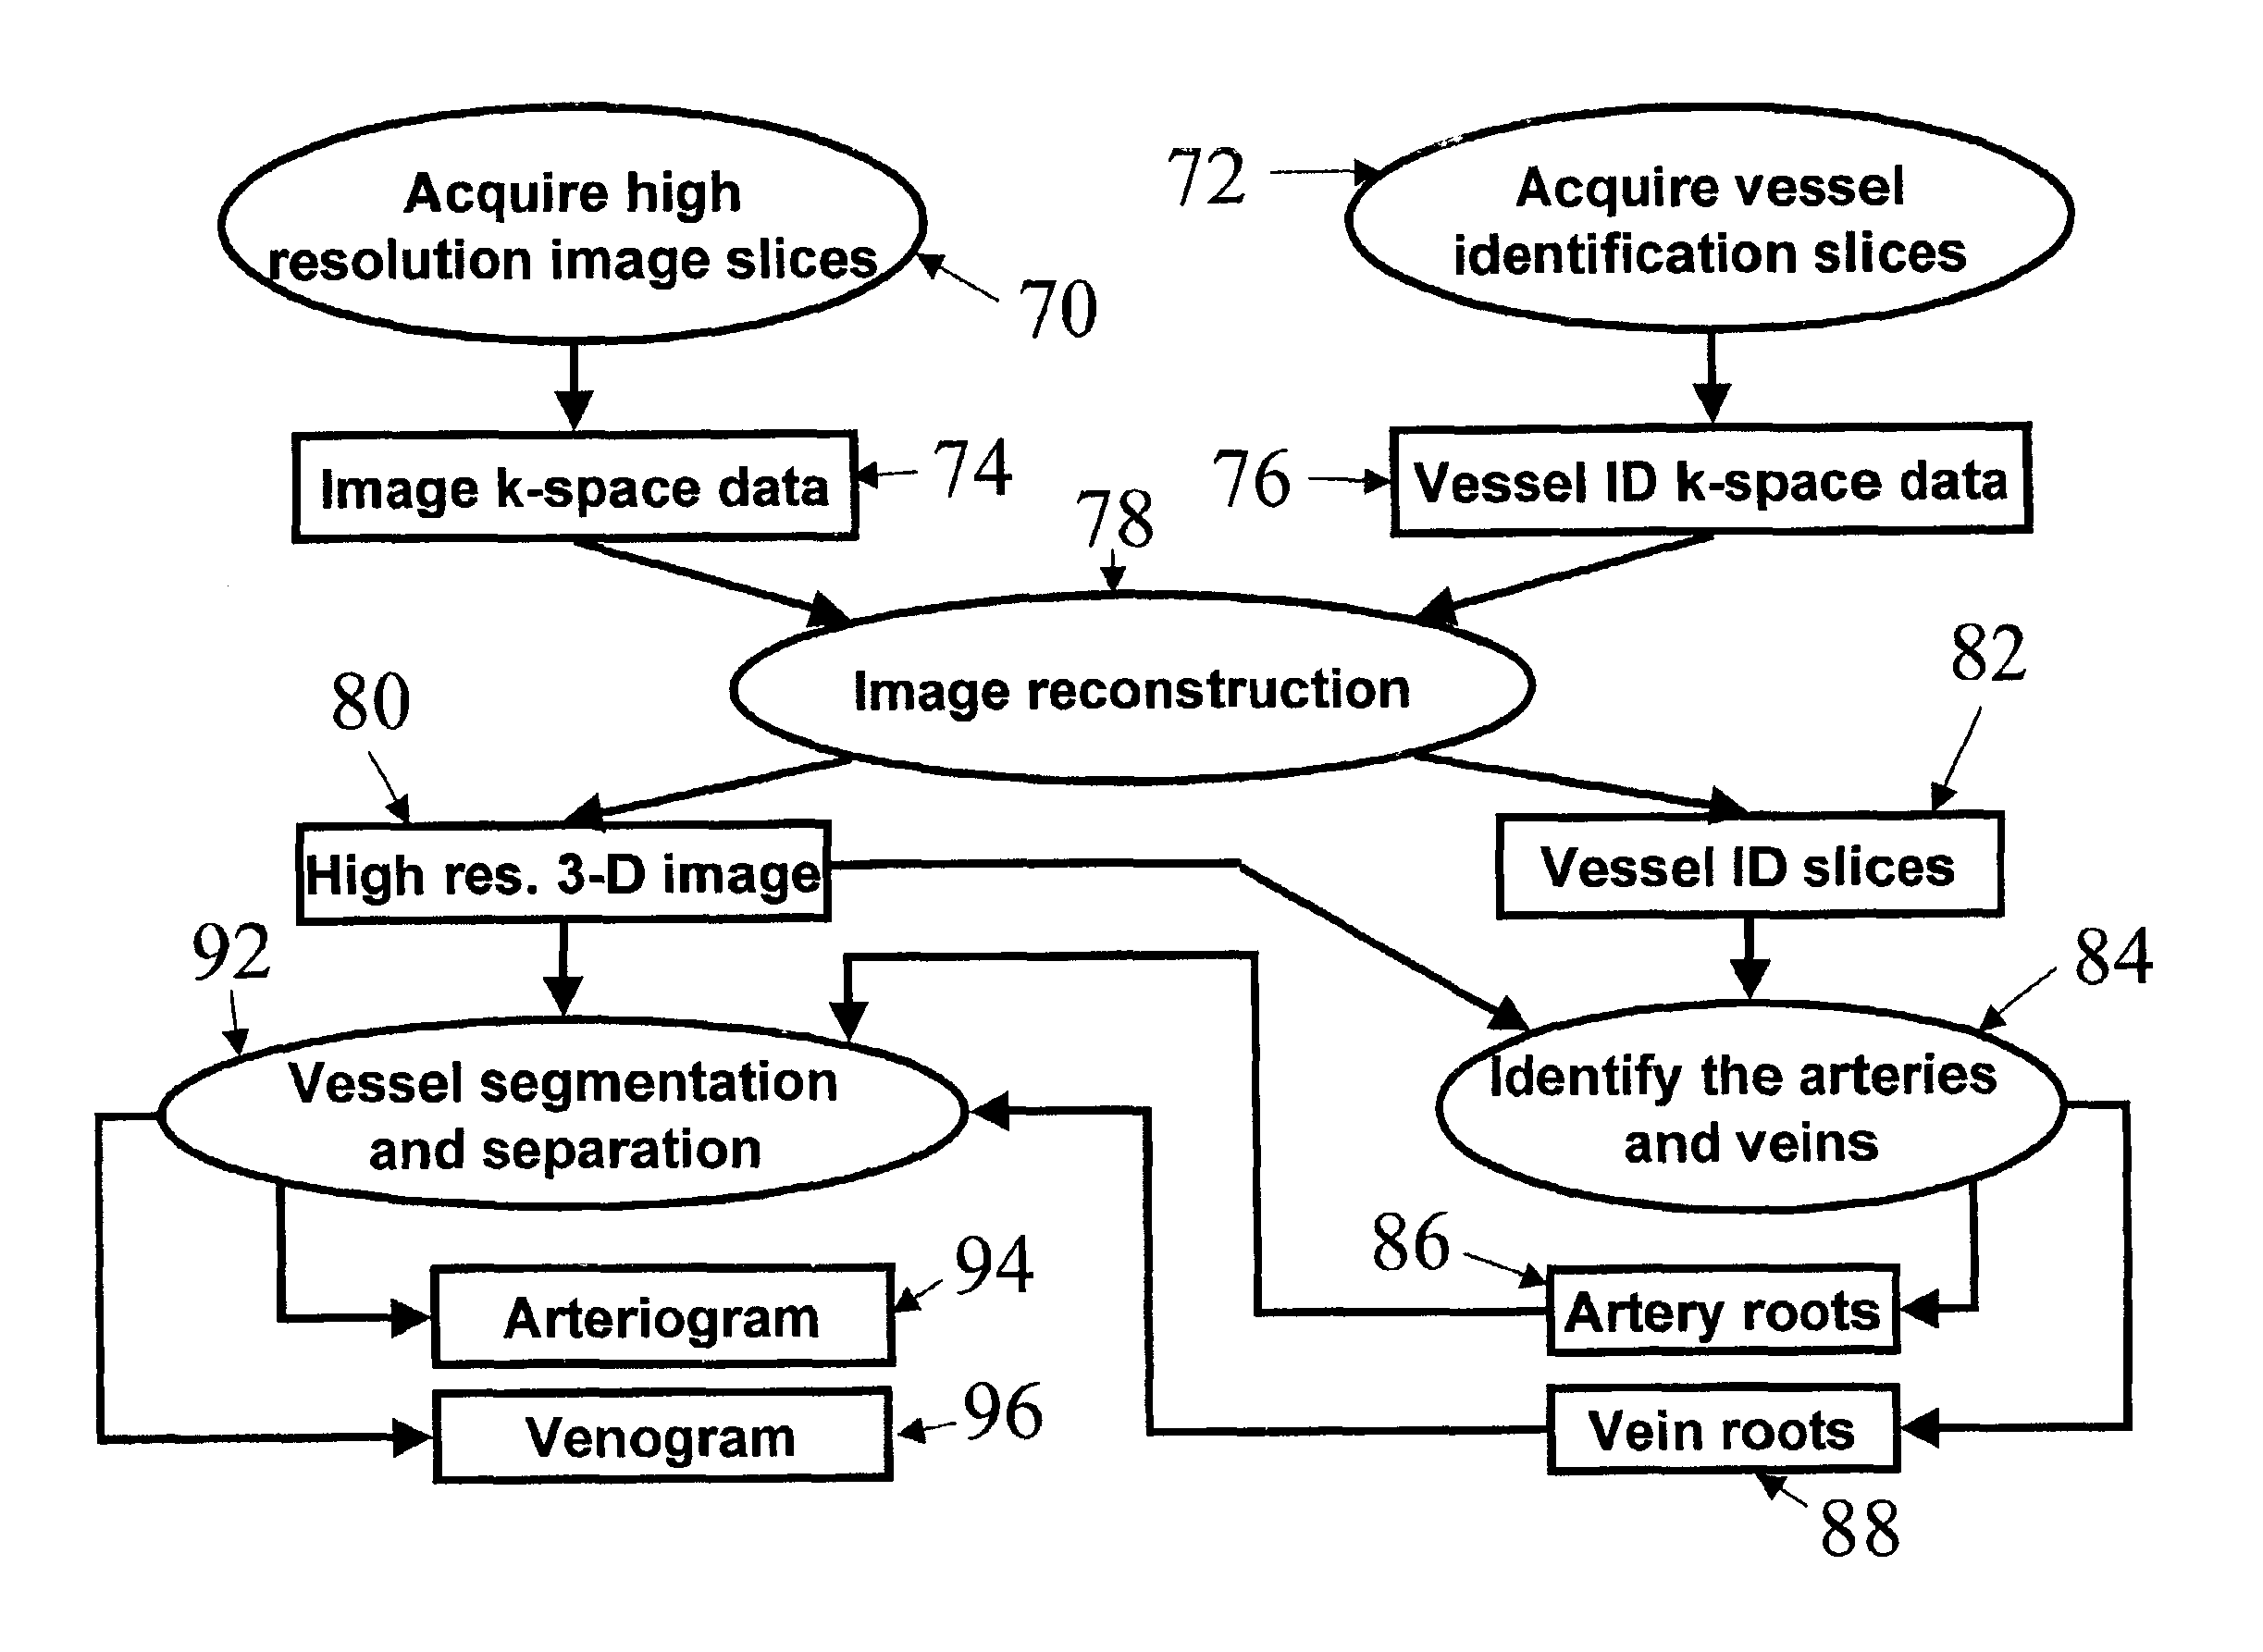 Automatic vessel indentification for angiographic screening